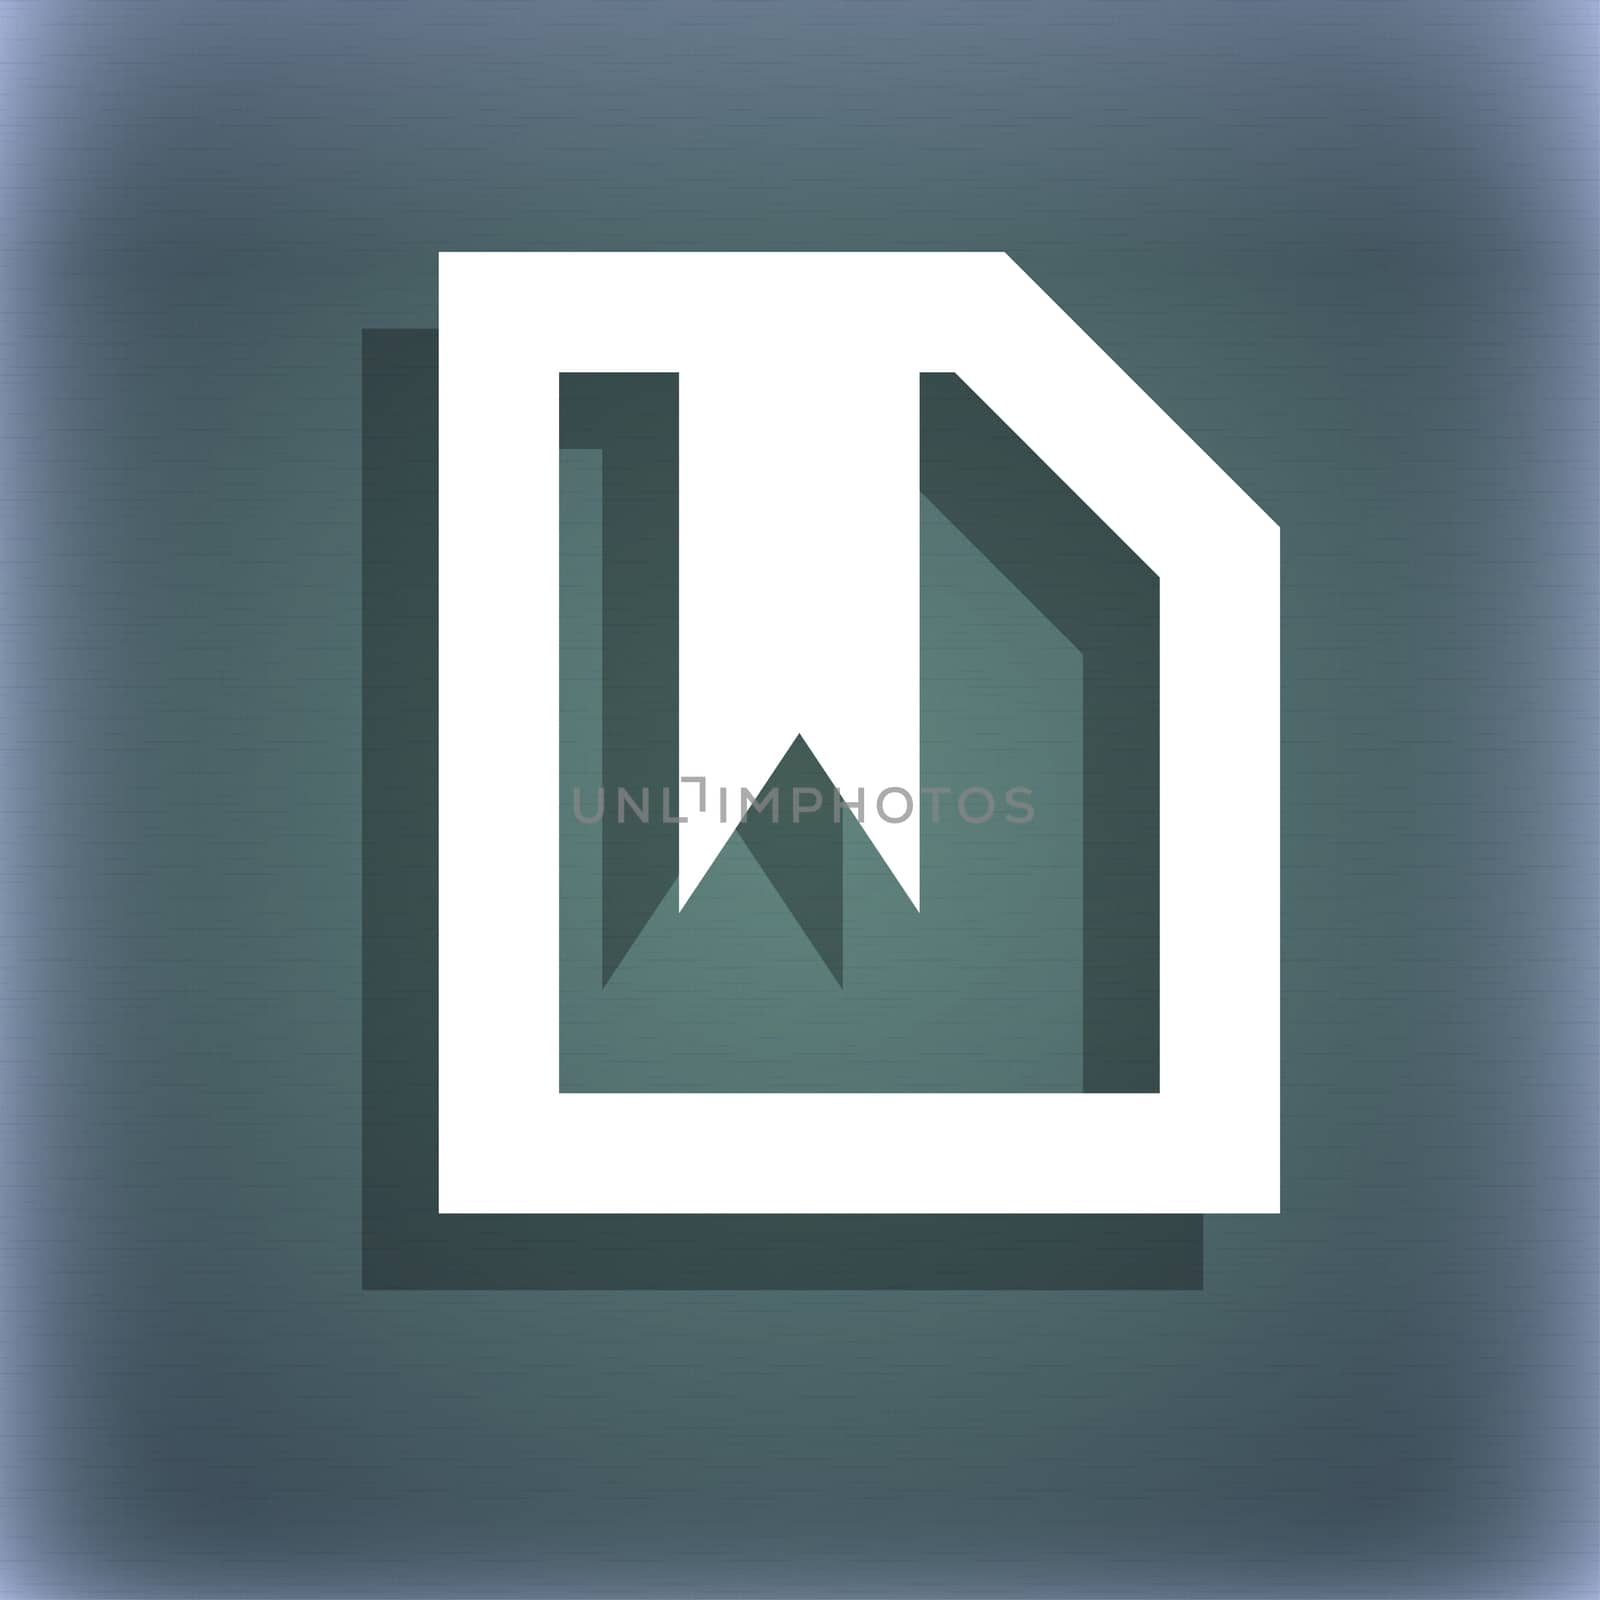 bookmark icon symbol on the blue-green abstract background with shadow and space for your text. illustration